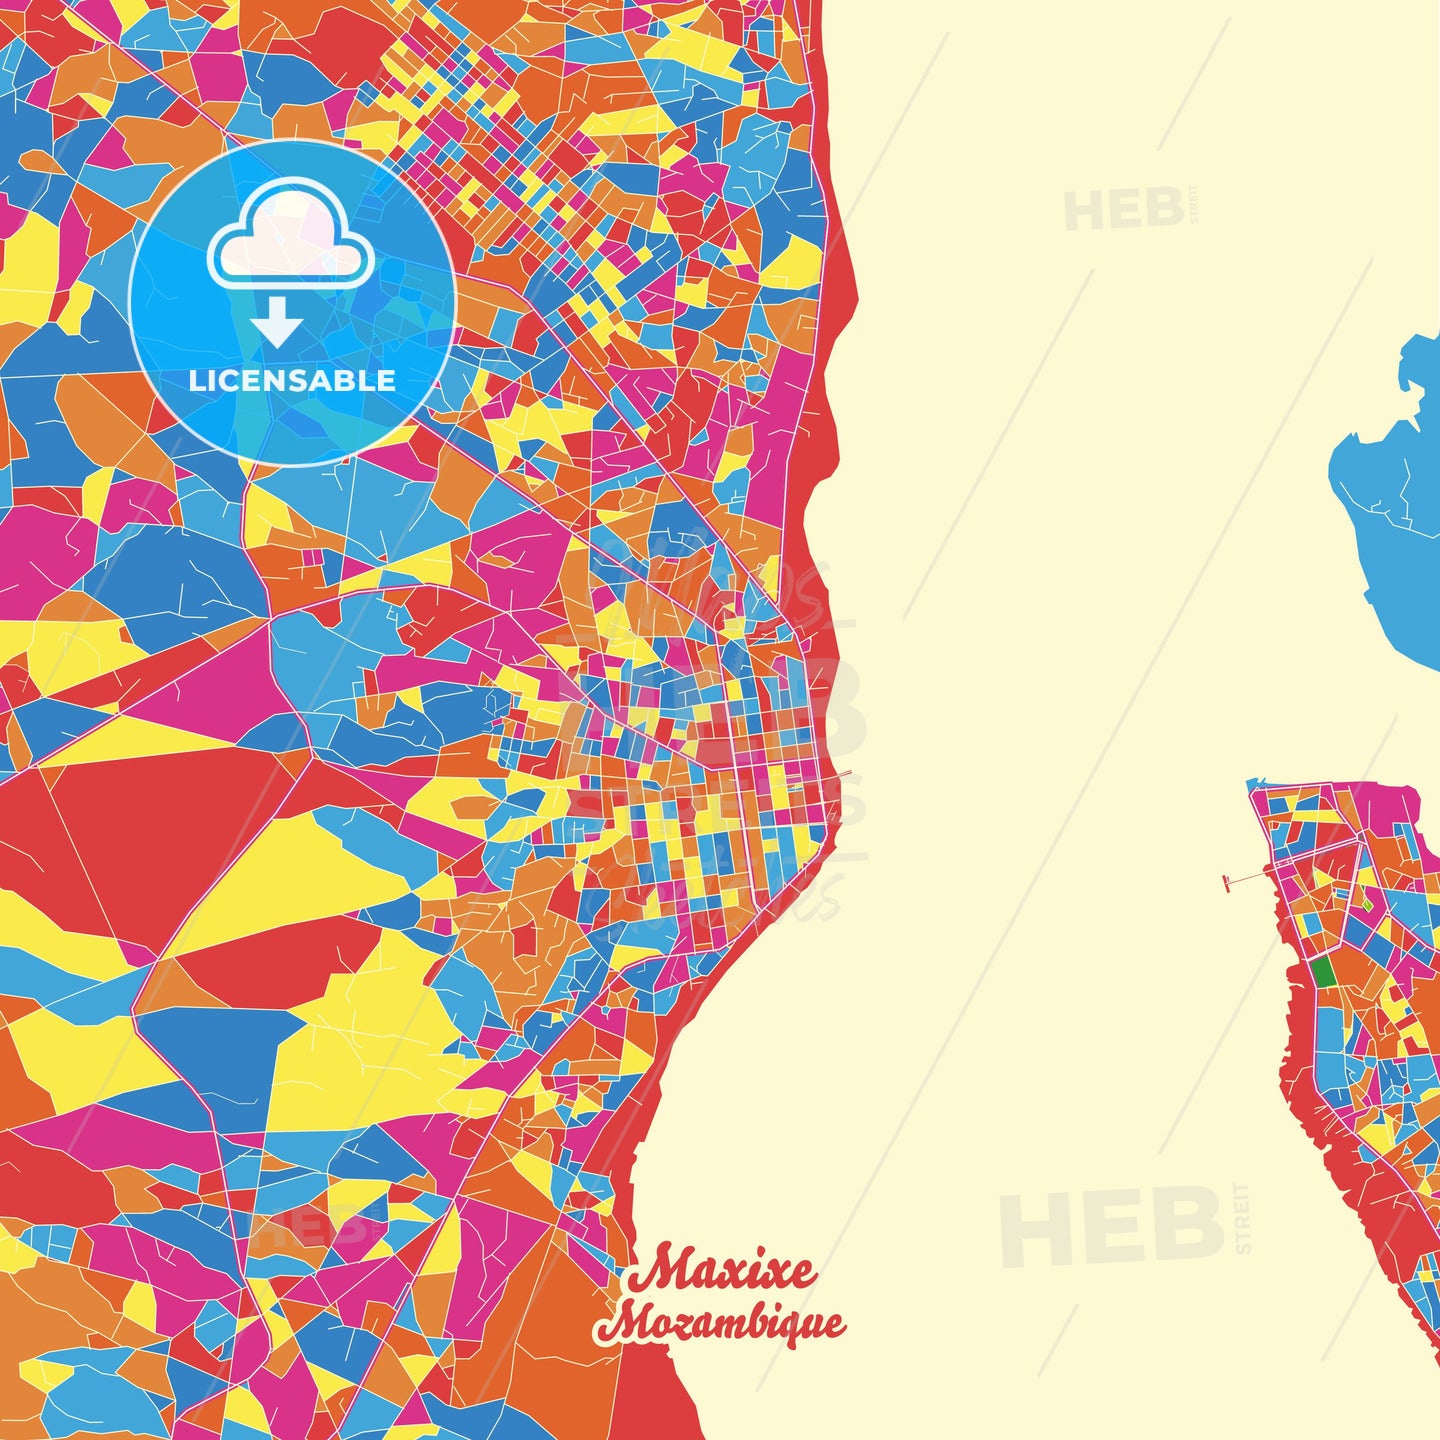 Maxixe, Mozambique Crazy Colorful Street Map Poster Template - HEBSTREITS Sketches